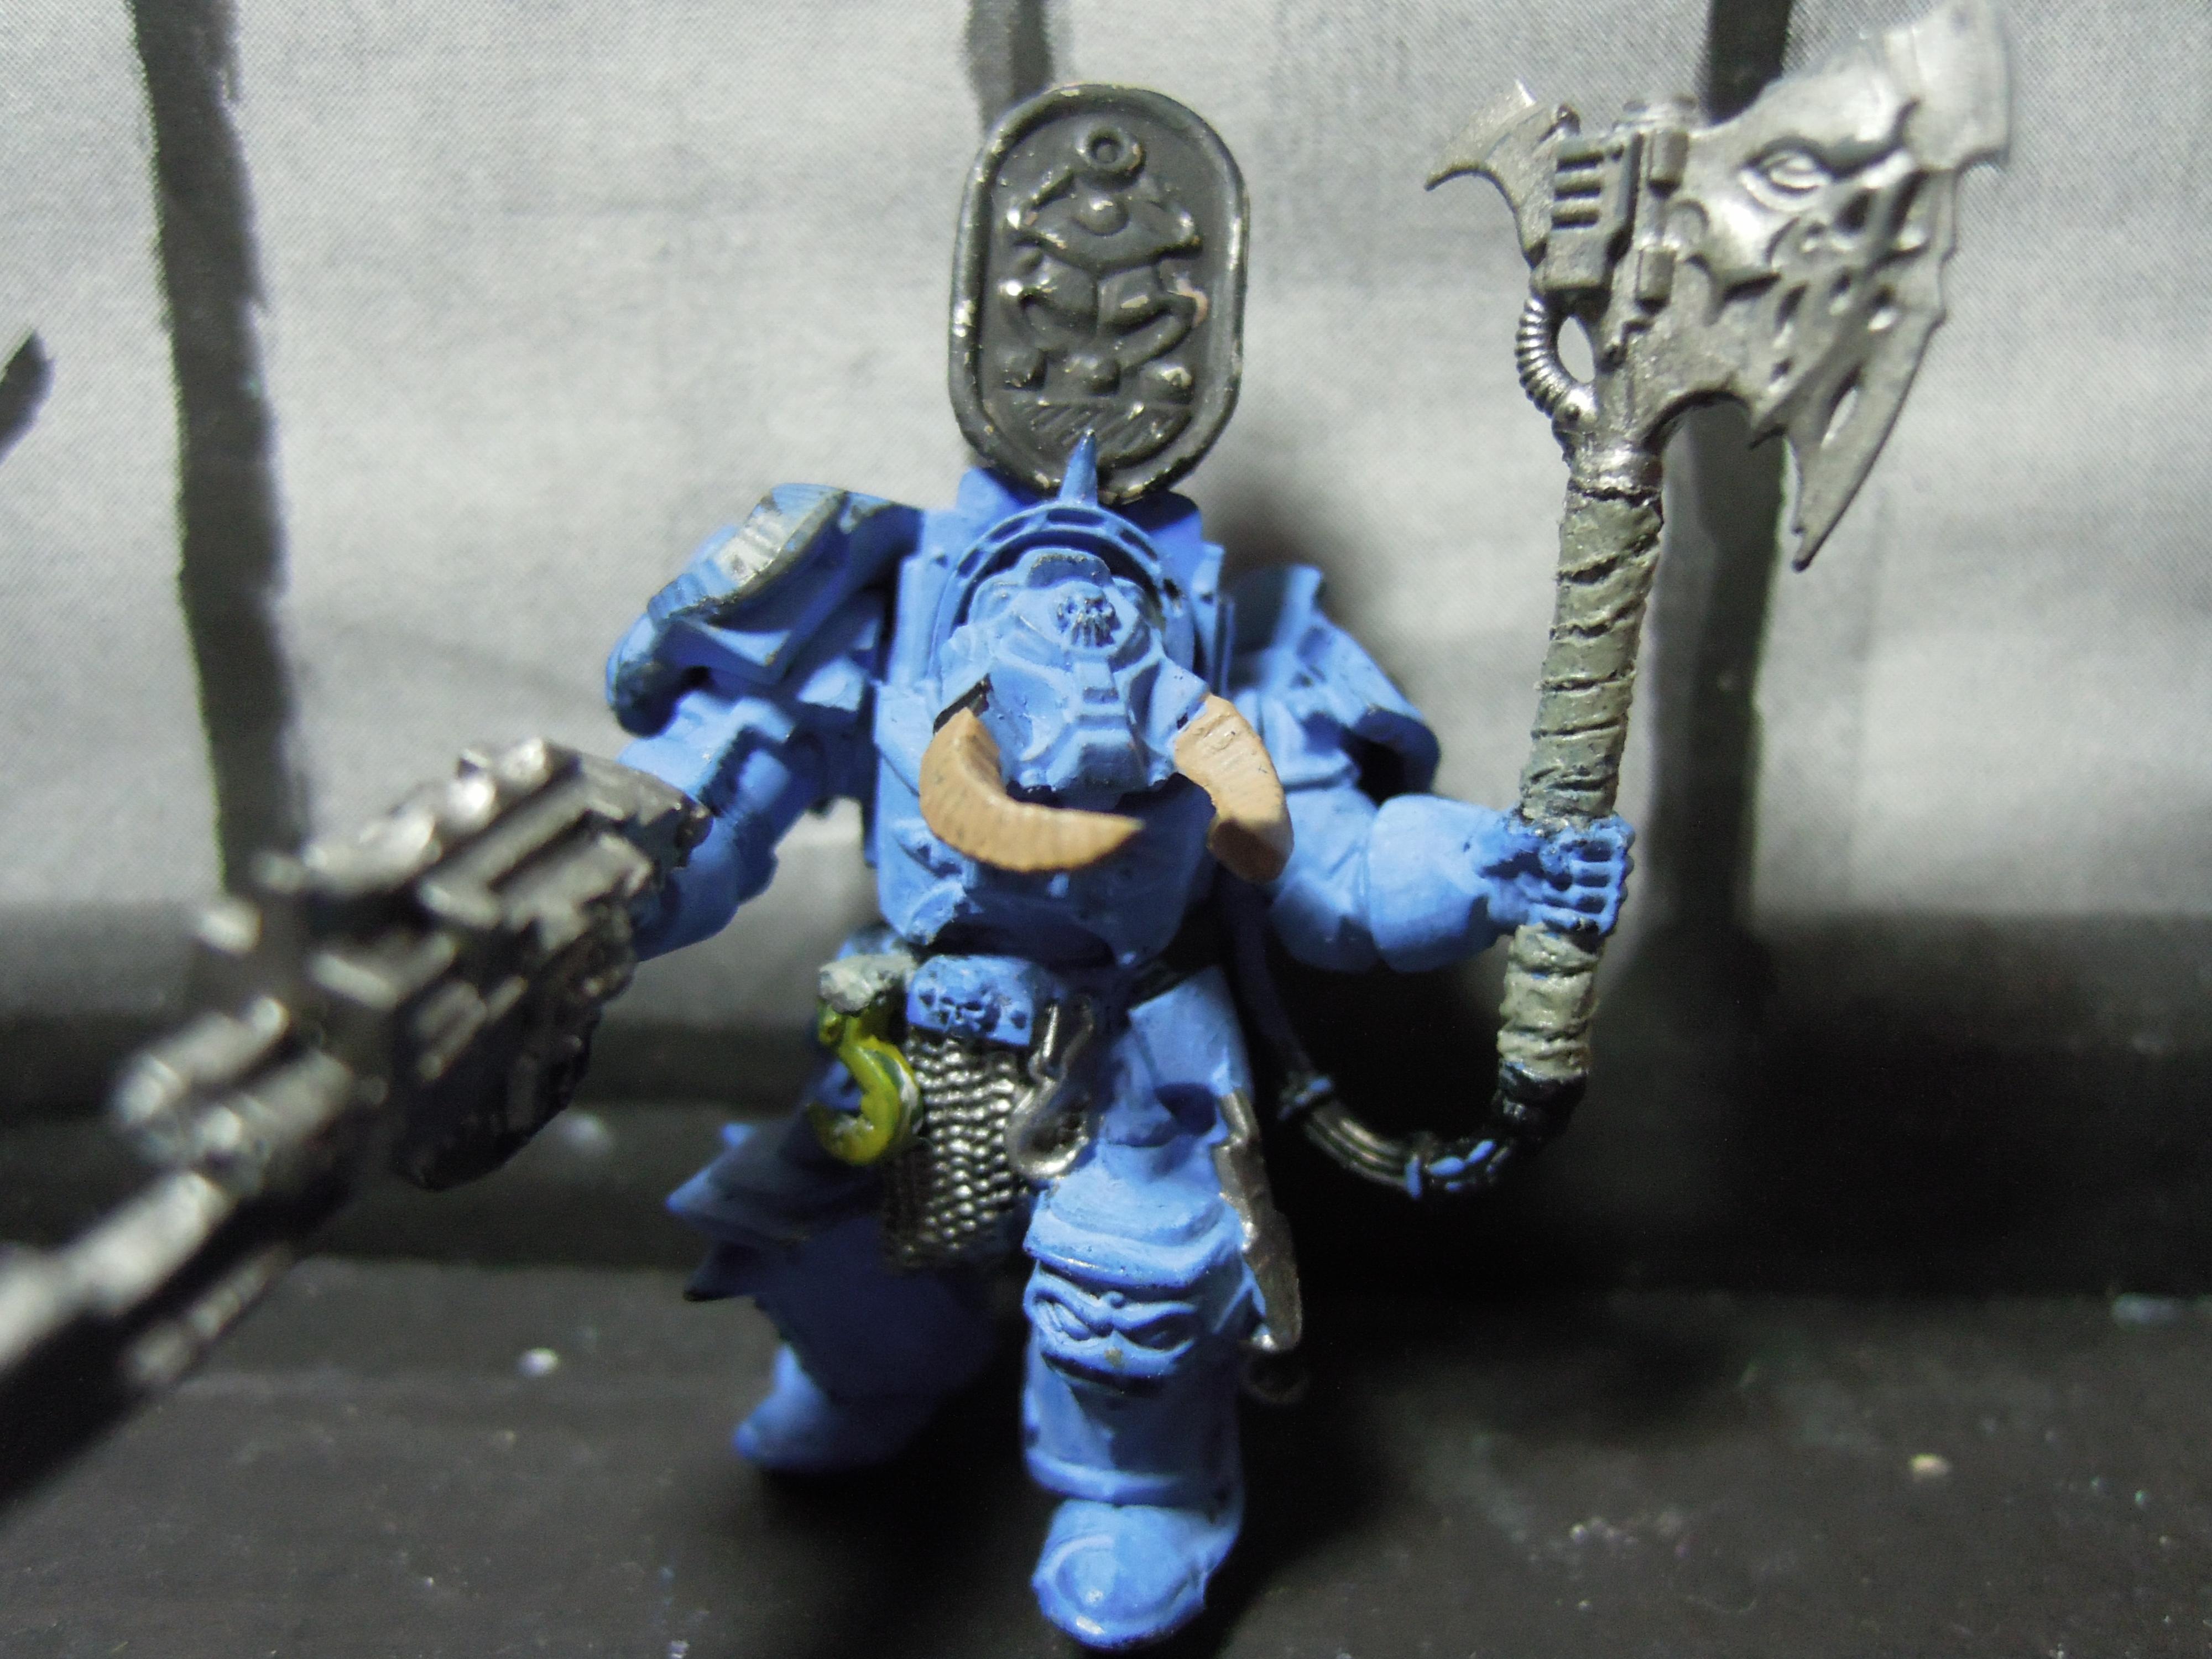 All Is Dust, Chaos, Chaos Space Marines, Conversion, Heresy, Heretic Astartes, Infantry, Power Axe, Scarabs, Storm Bolter, Terminator Armor, Thousand Sons, Traitor Legions, Tzeentch, Warhammer 40,000, Work In Progress